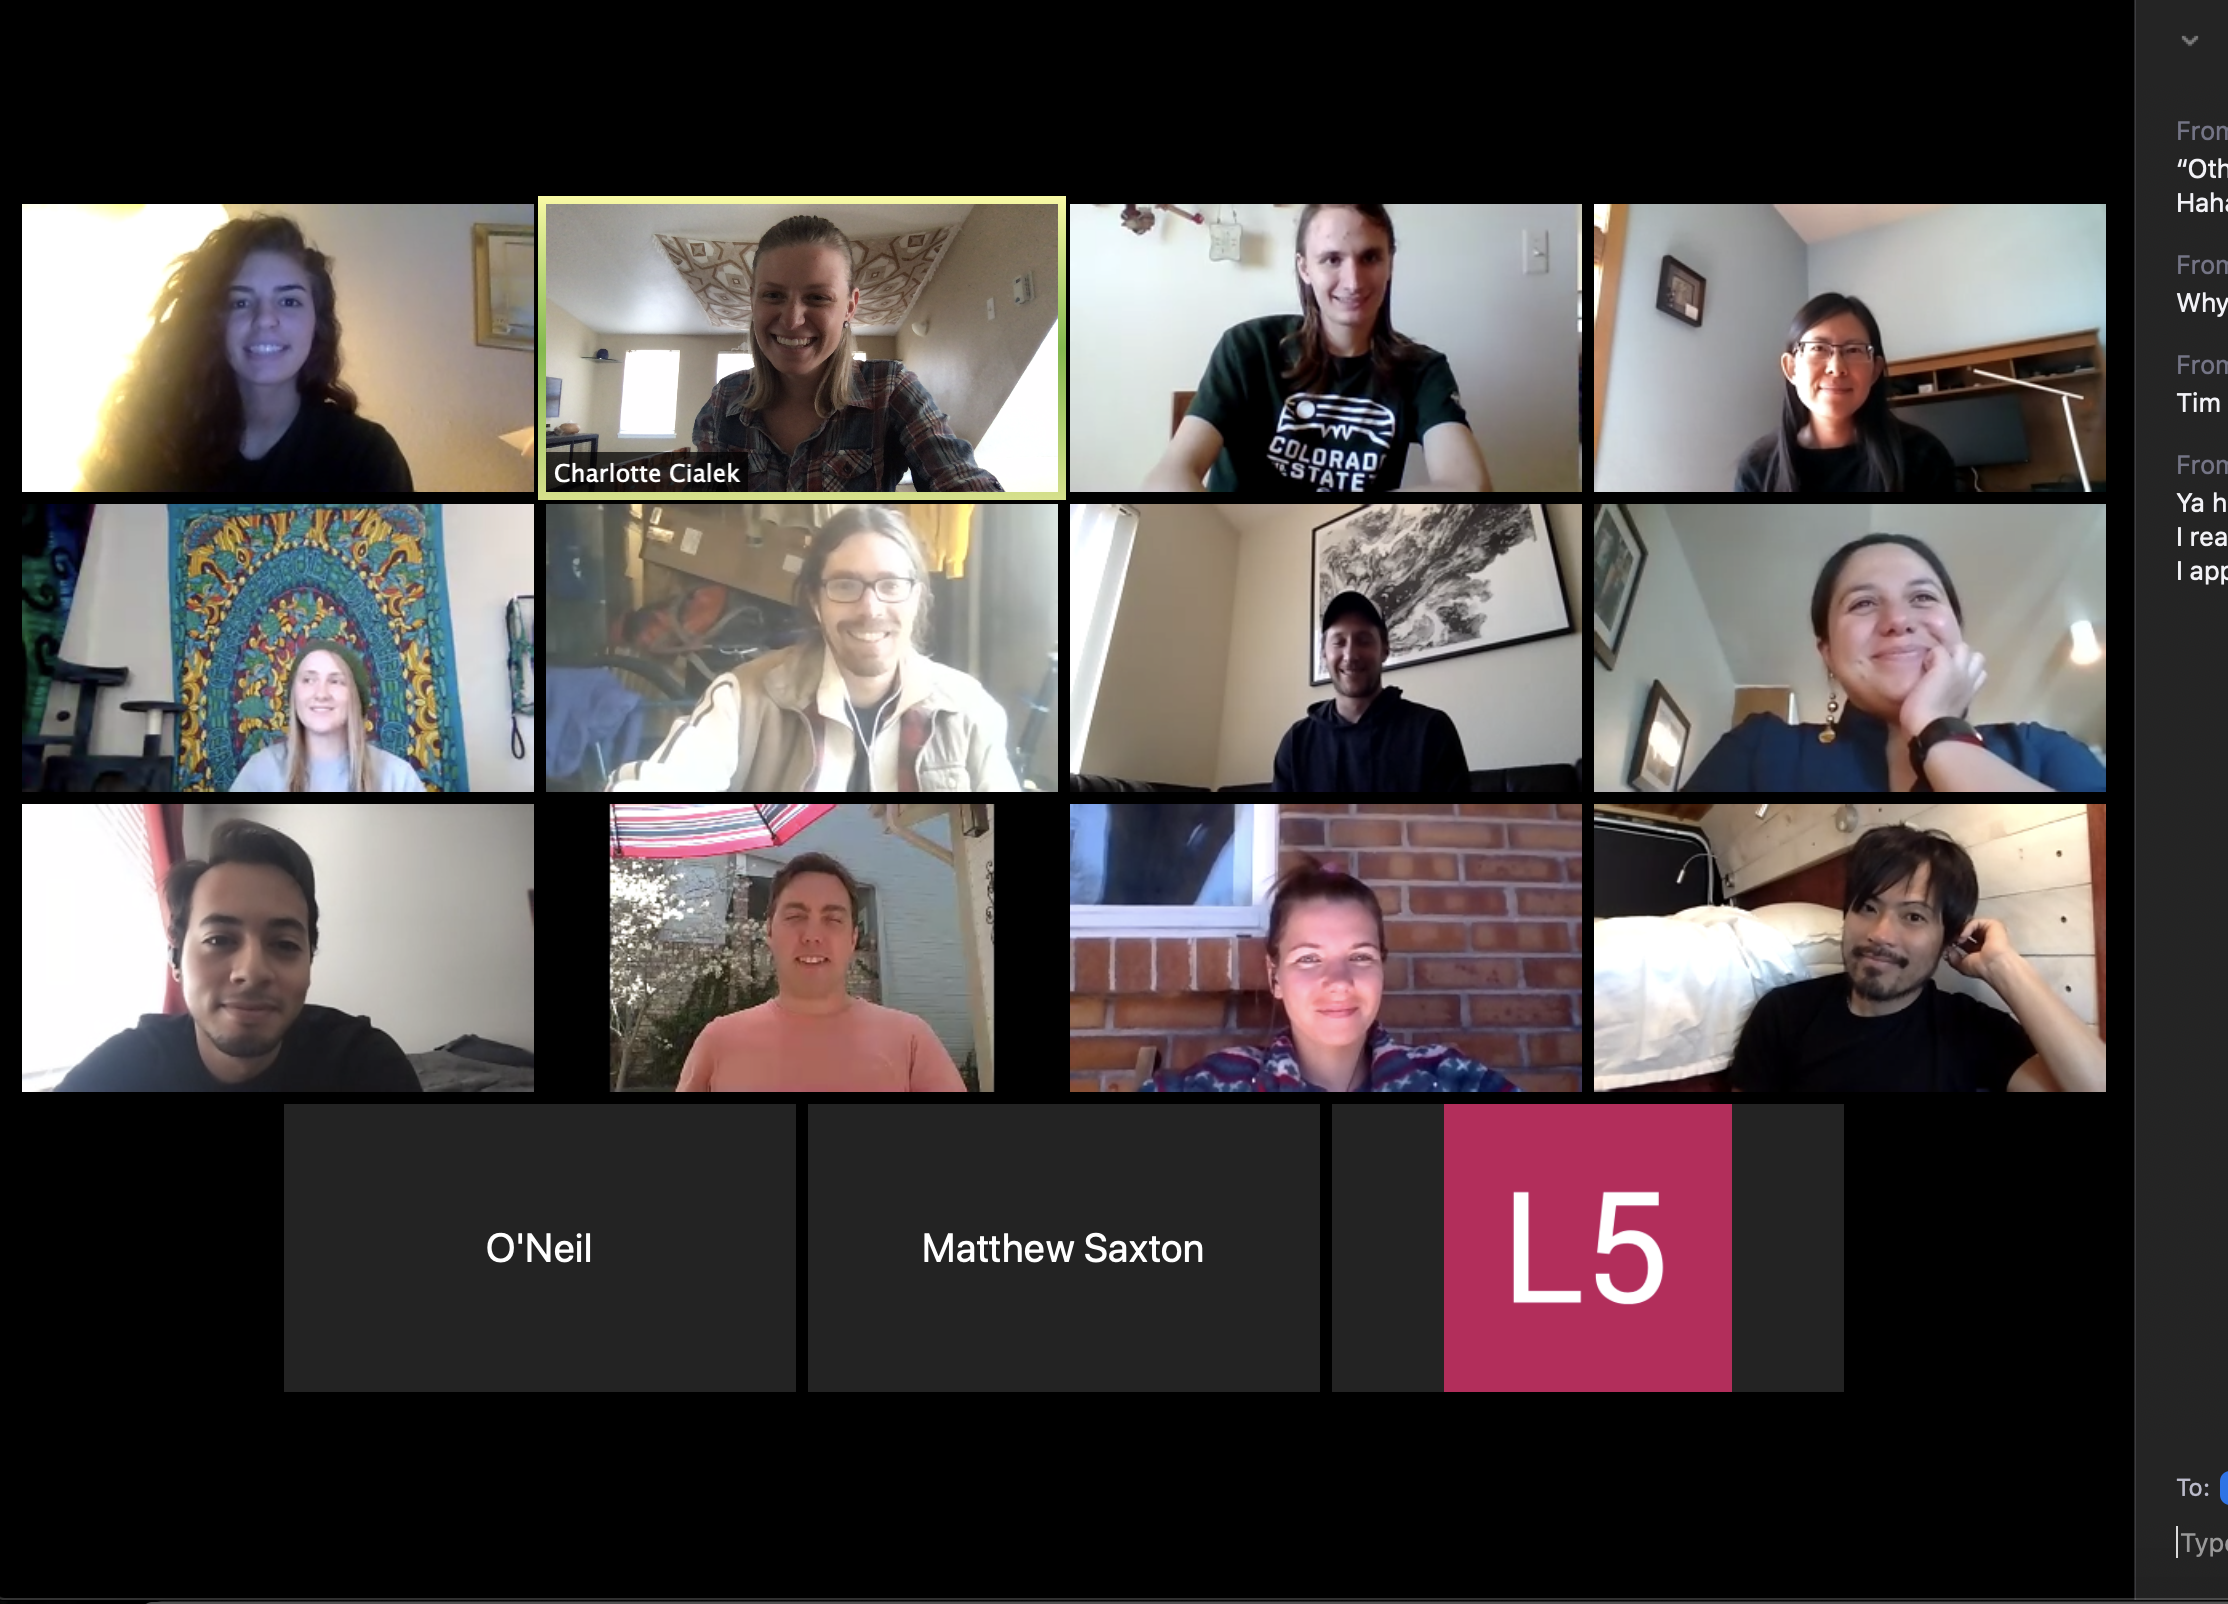 The "new normal": our weekly lab group meetings by video call. Starting in the top left corner: Claire Baptiste, Charlotte Cialek, Hunter Ogg, Dr. Ning Zhao, Hailey Sanders, Dr. Phil Fox, Eric Ron, Dr. Linda Forero, Gabriel Galindo, Dr. Tim Stasevich, Amanda Koch, Dr. Tatsuya Morisaki, Dr. O’Neil Wiggan, Matt Saxton, and Dr. Luis Aguilera